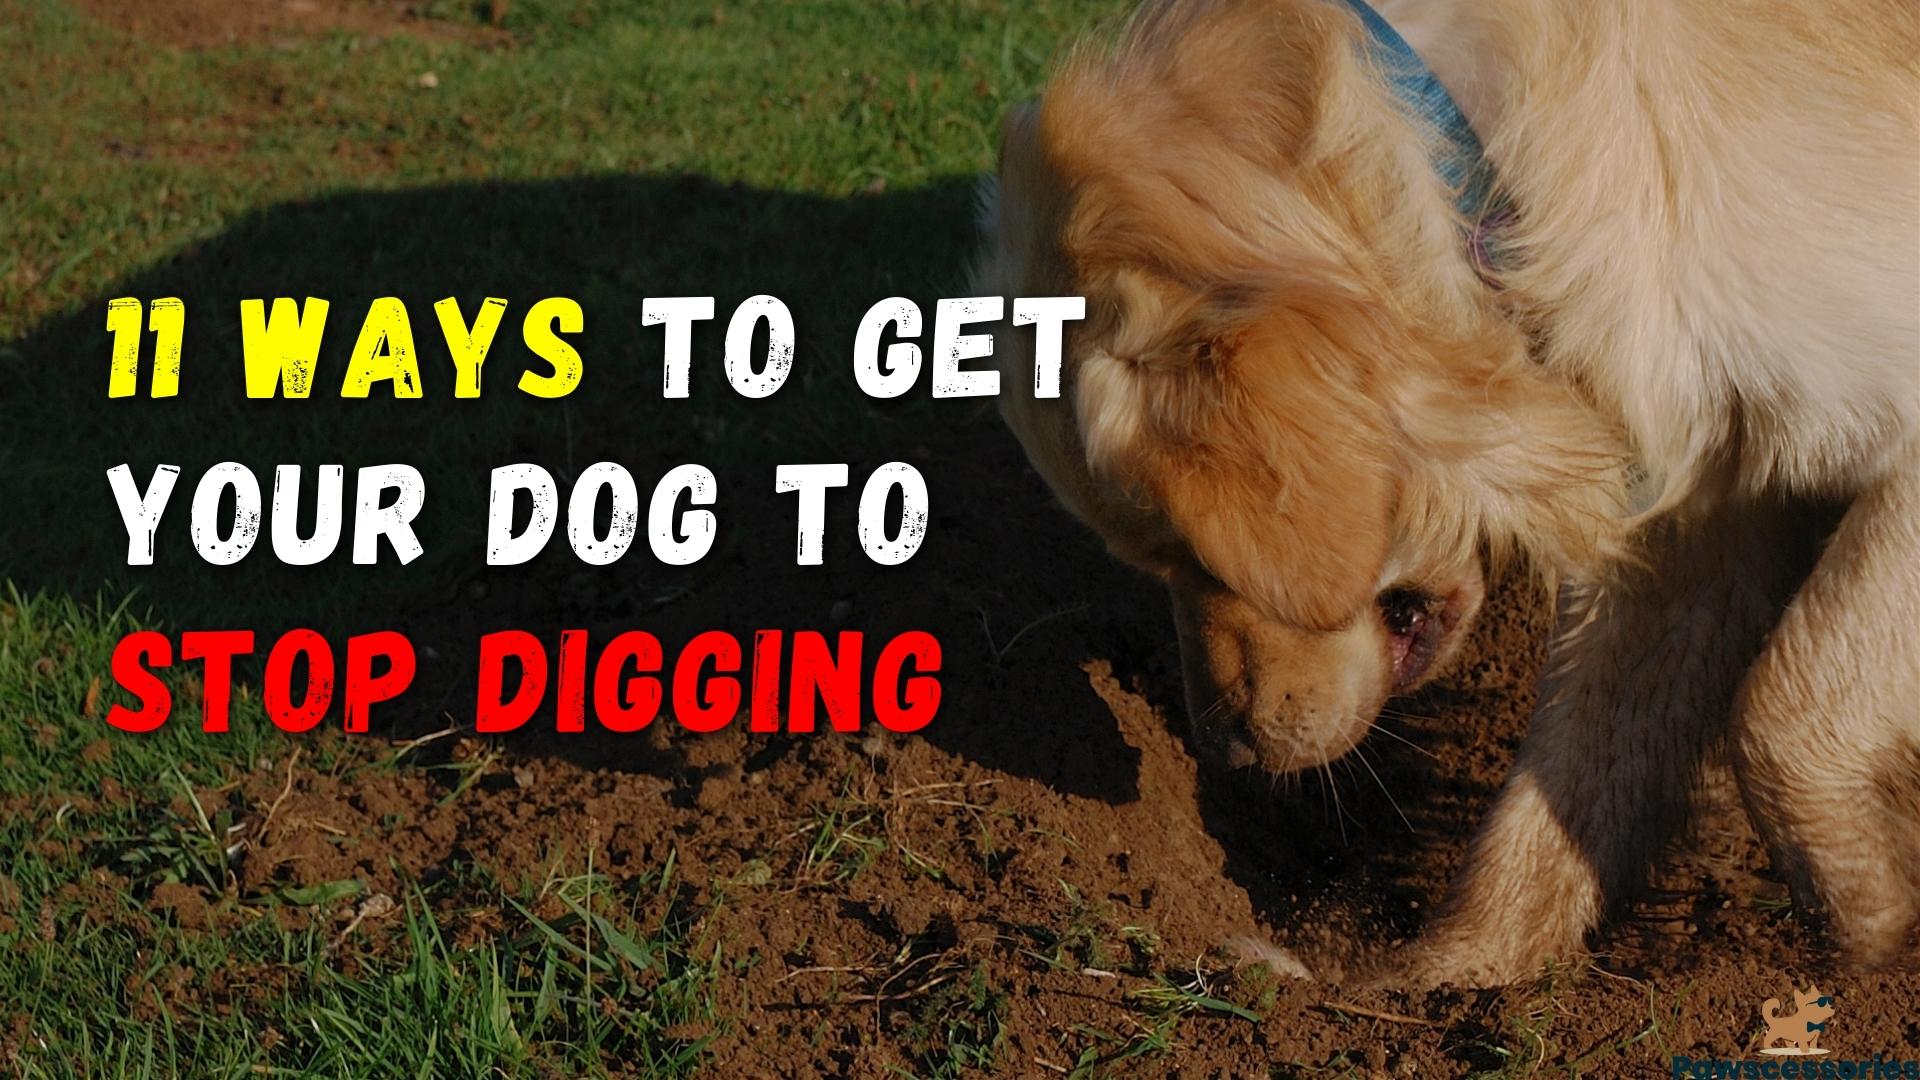 11 Ways To Get Your Dog To Stop Digging (#6 Is Hilarious)